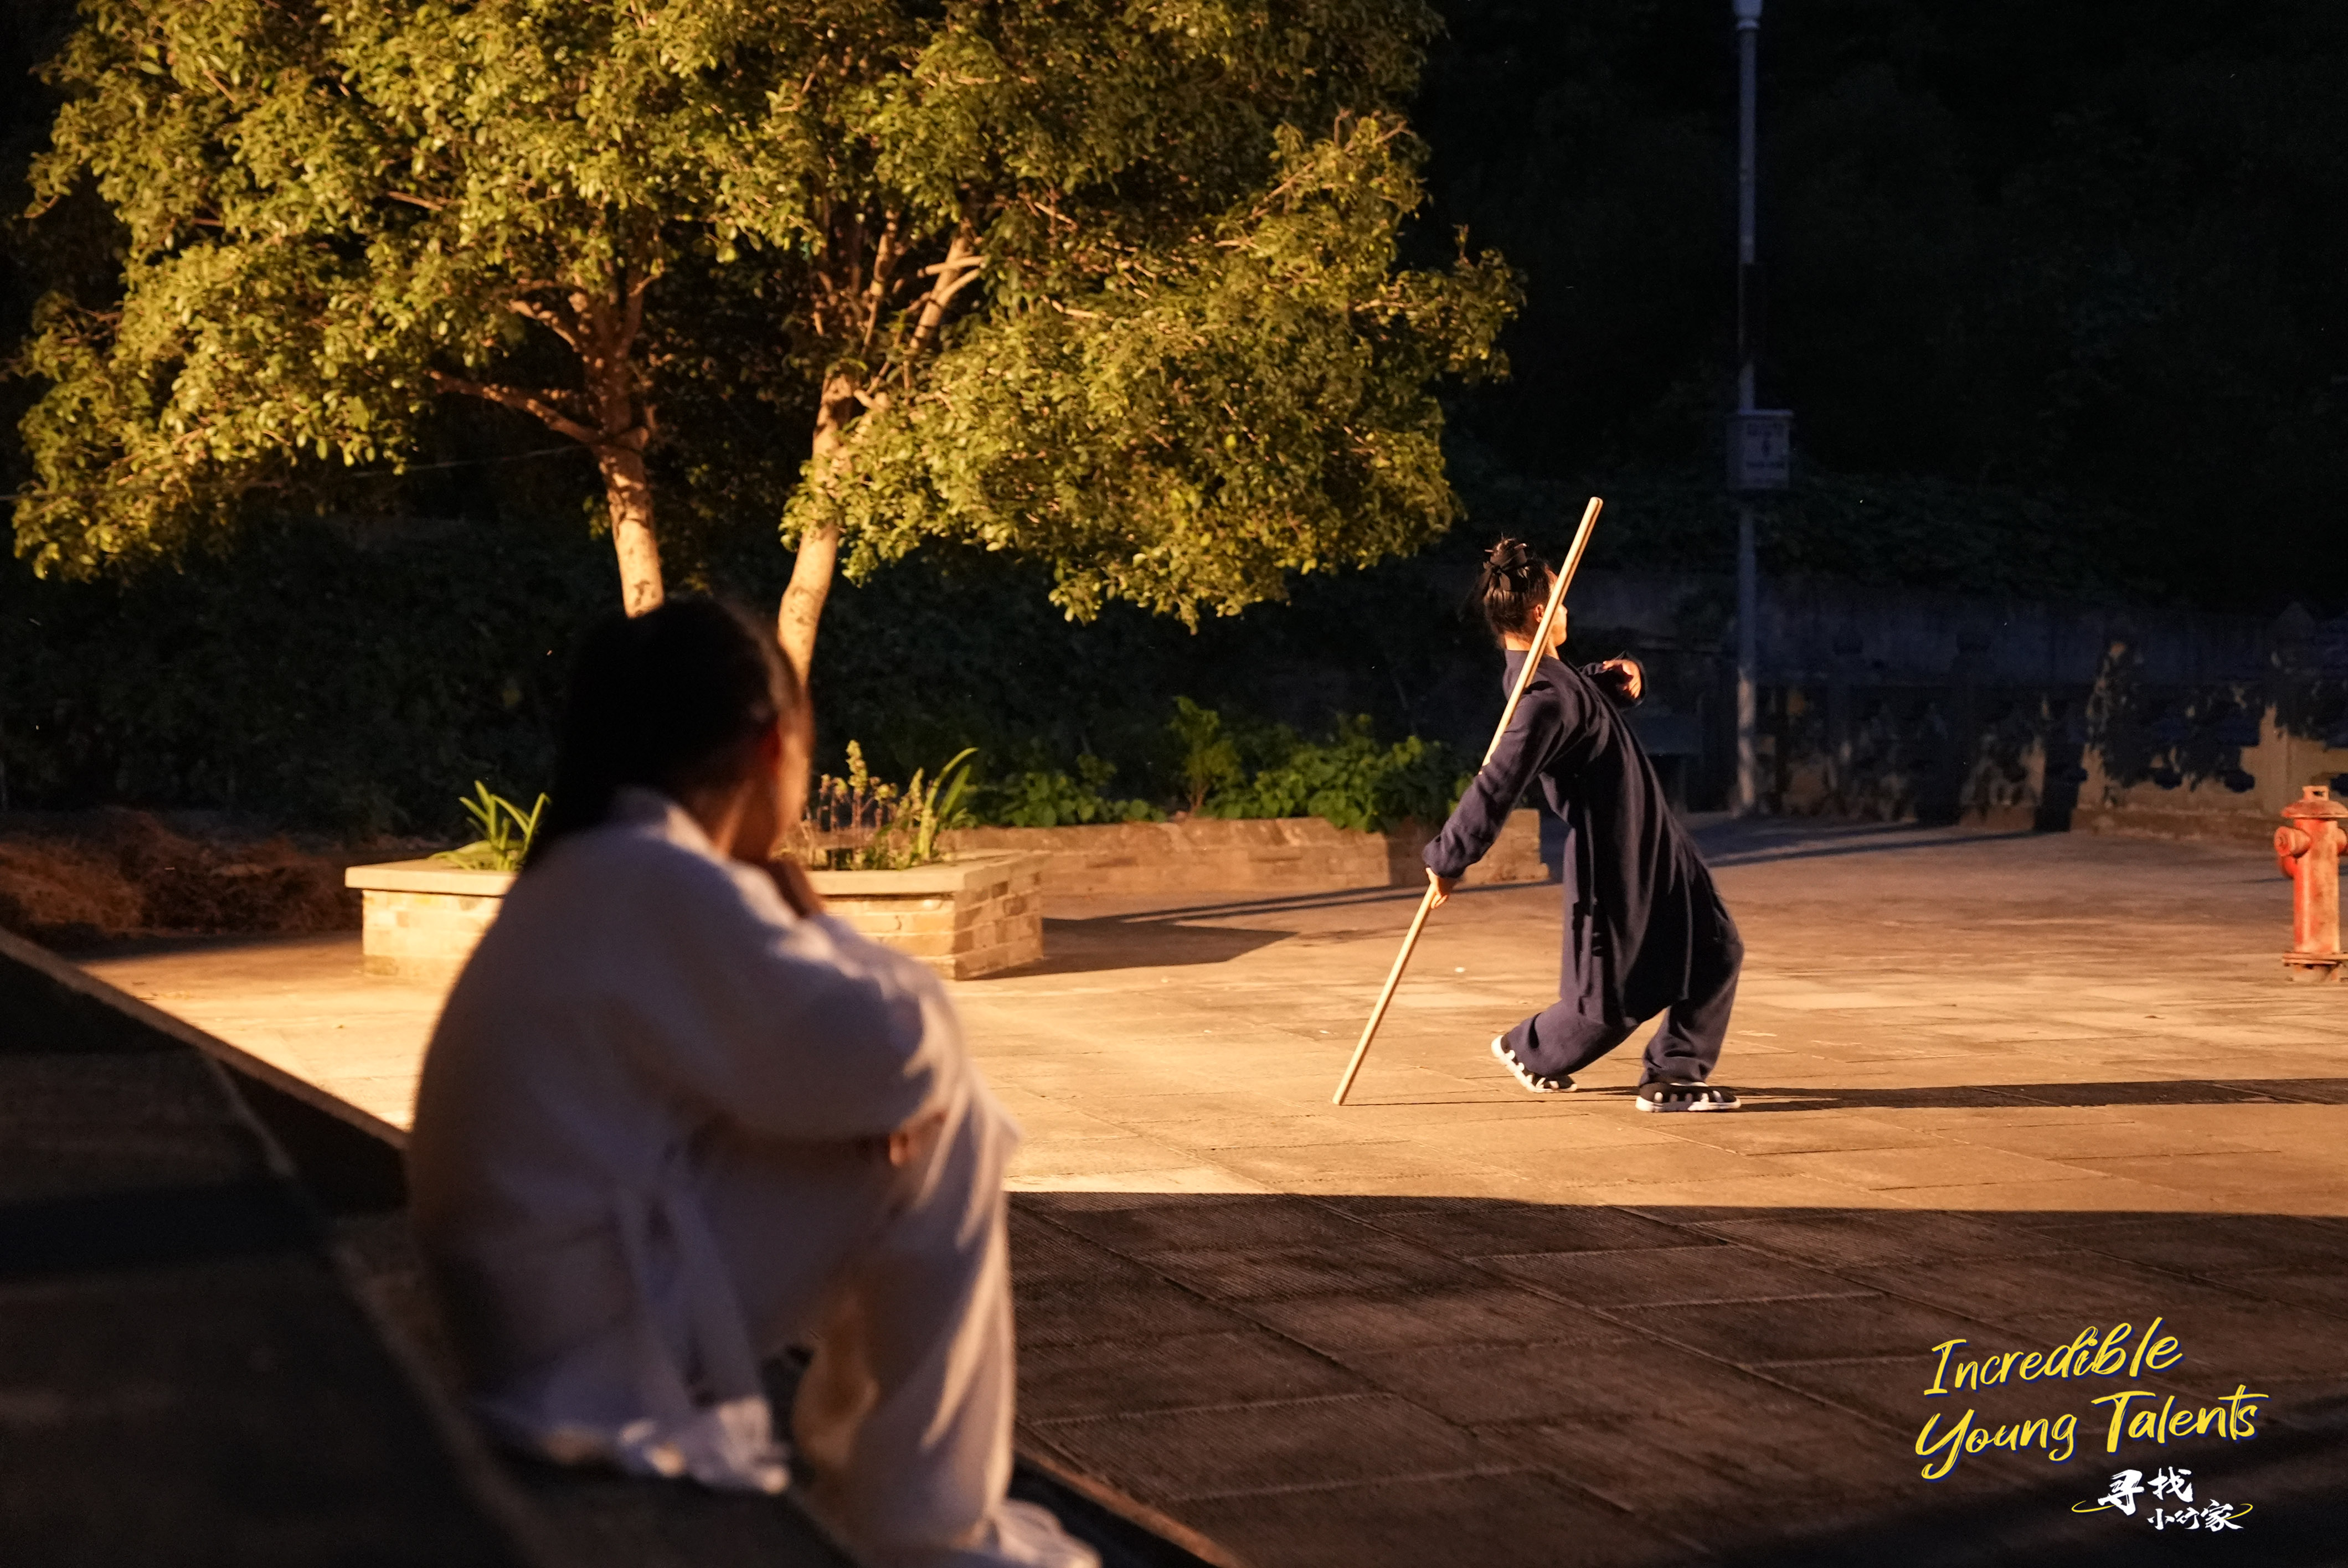 Li Muzi is particularly interested in staff techniques and has a longing to learn the Wudang Eight Immortals Staff routine. In her spare time, she watches how a senior student practices it. /CGTN